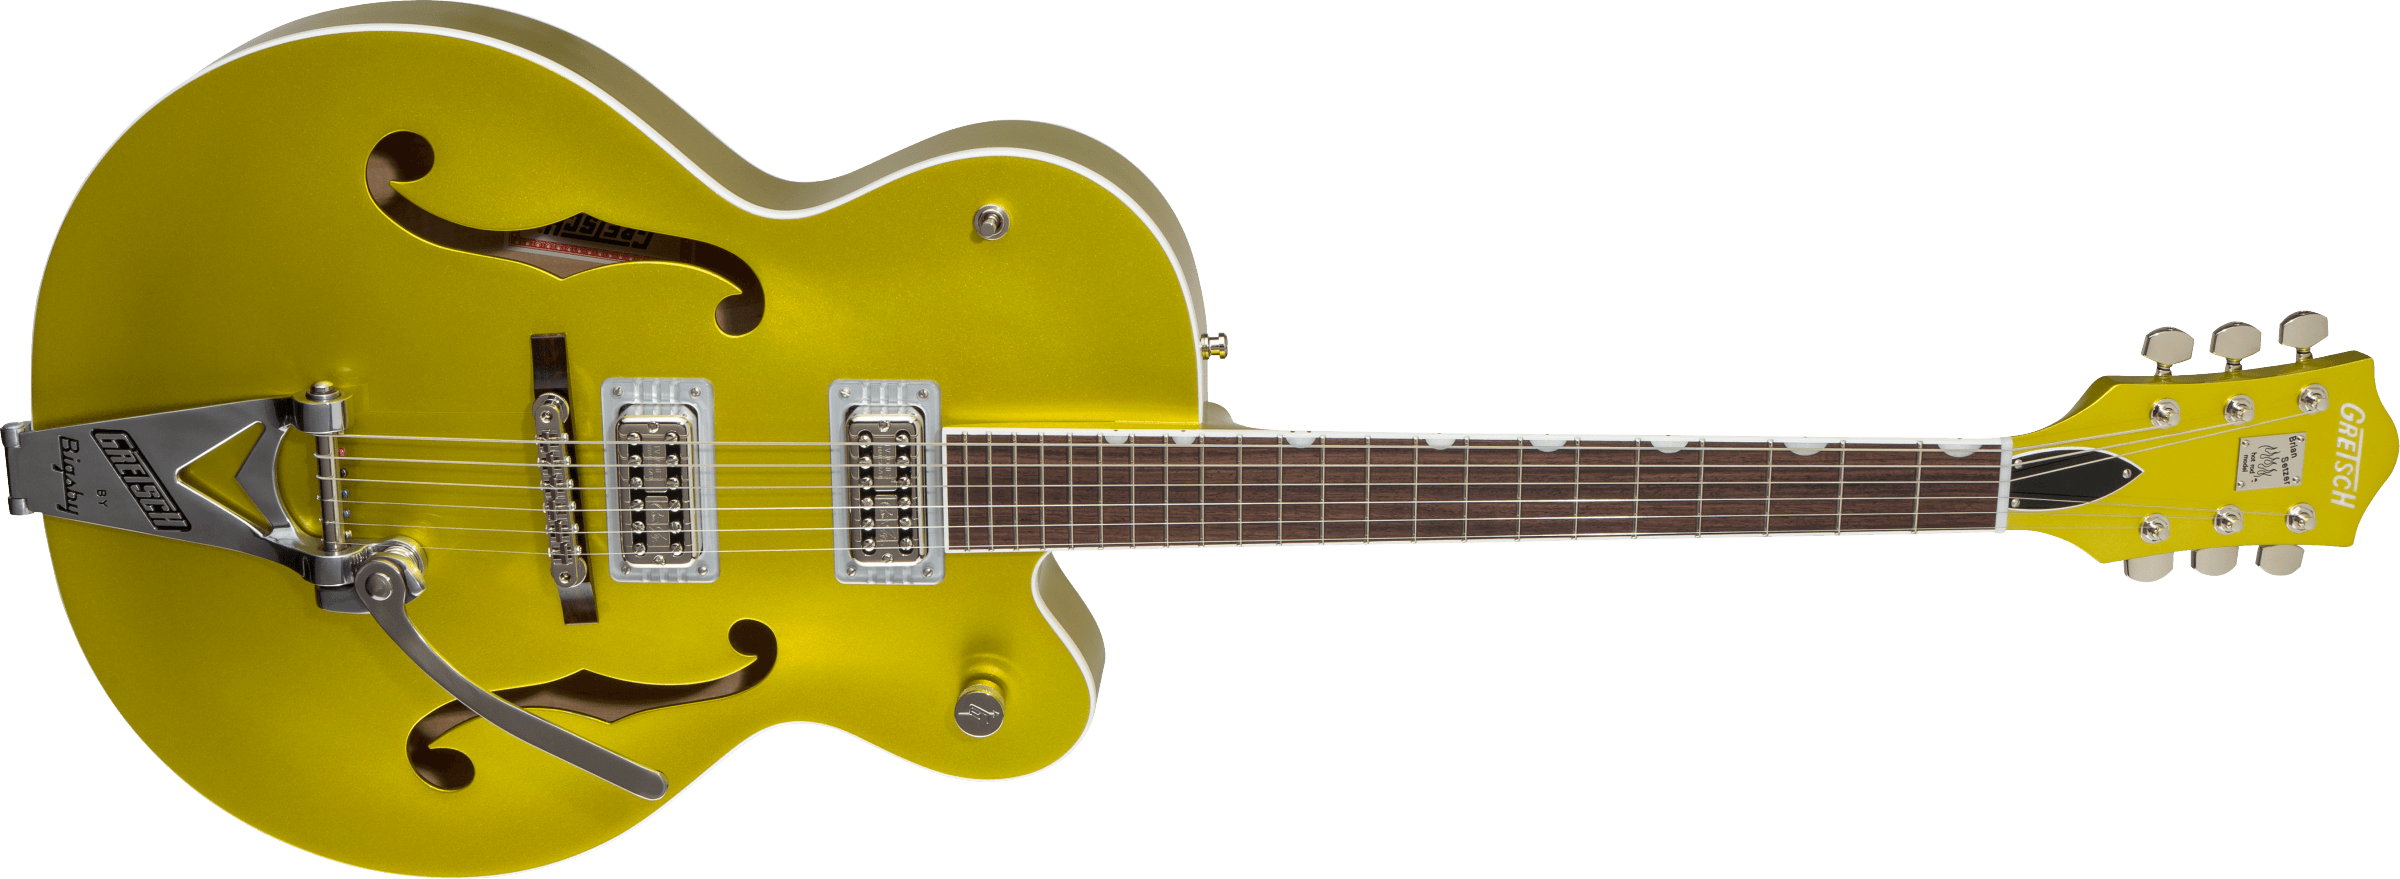 G6120T-HR Brian Setzer Signature Hot Rod Hollow Body with Bigsby, Rosewood Fingerboard, Lime Gold追加画像